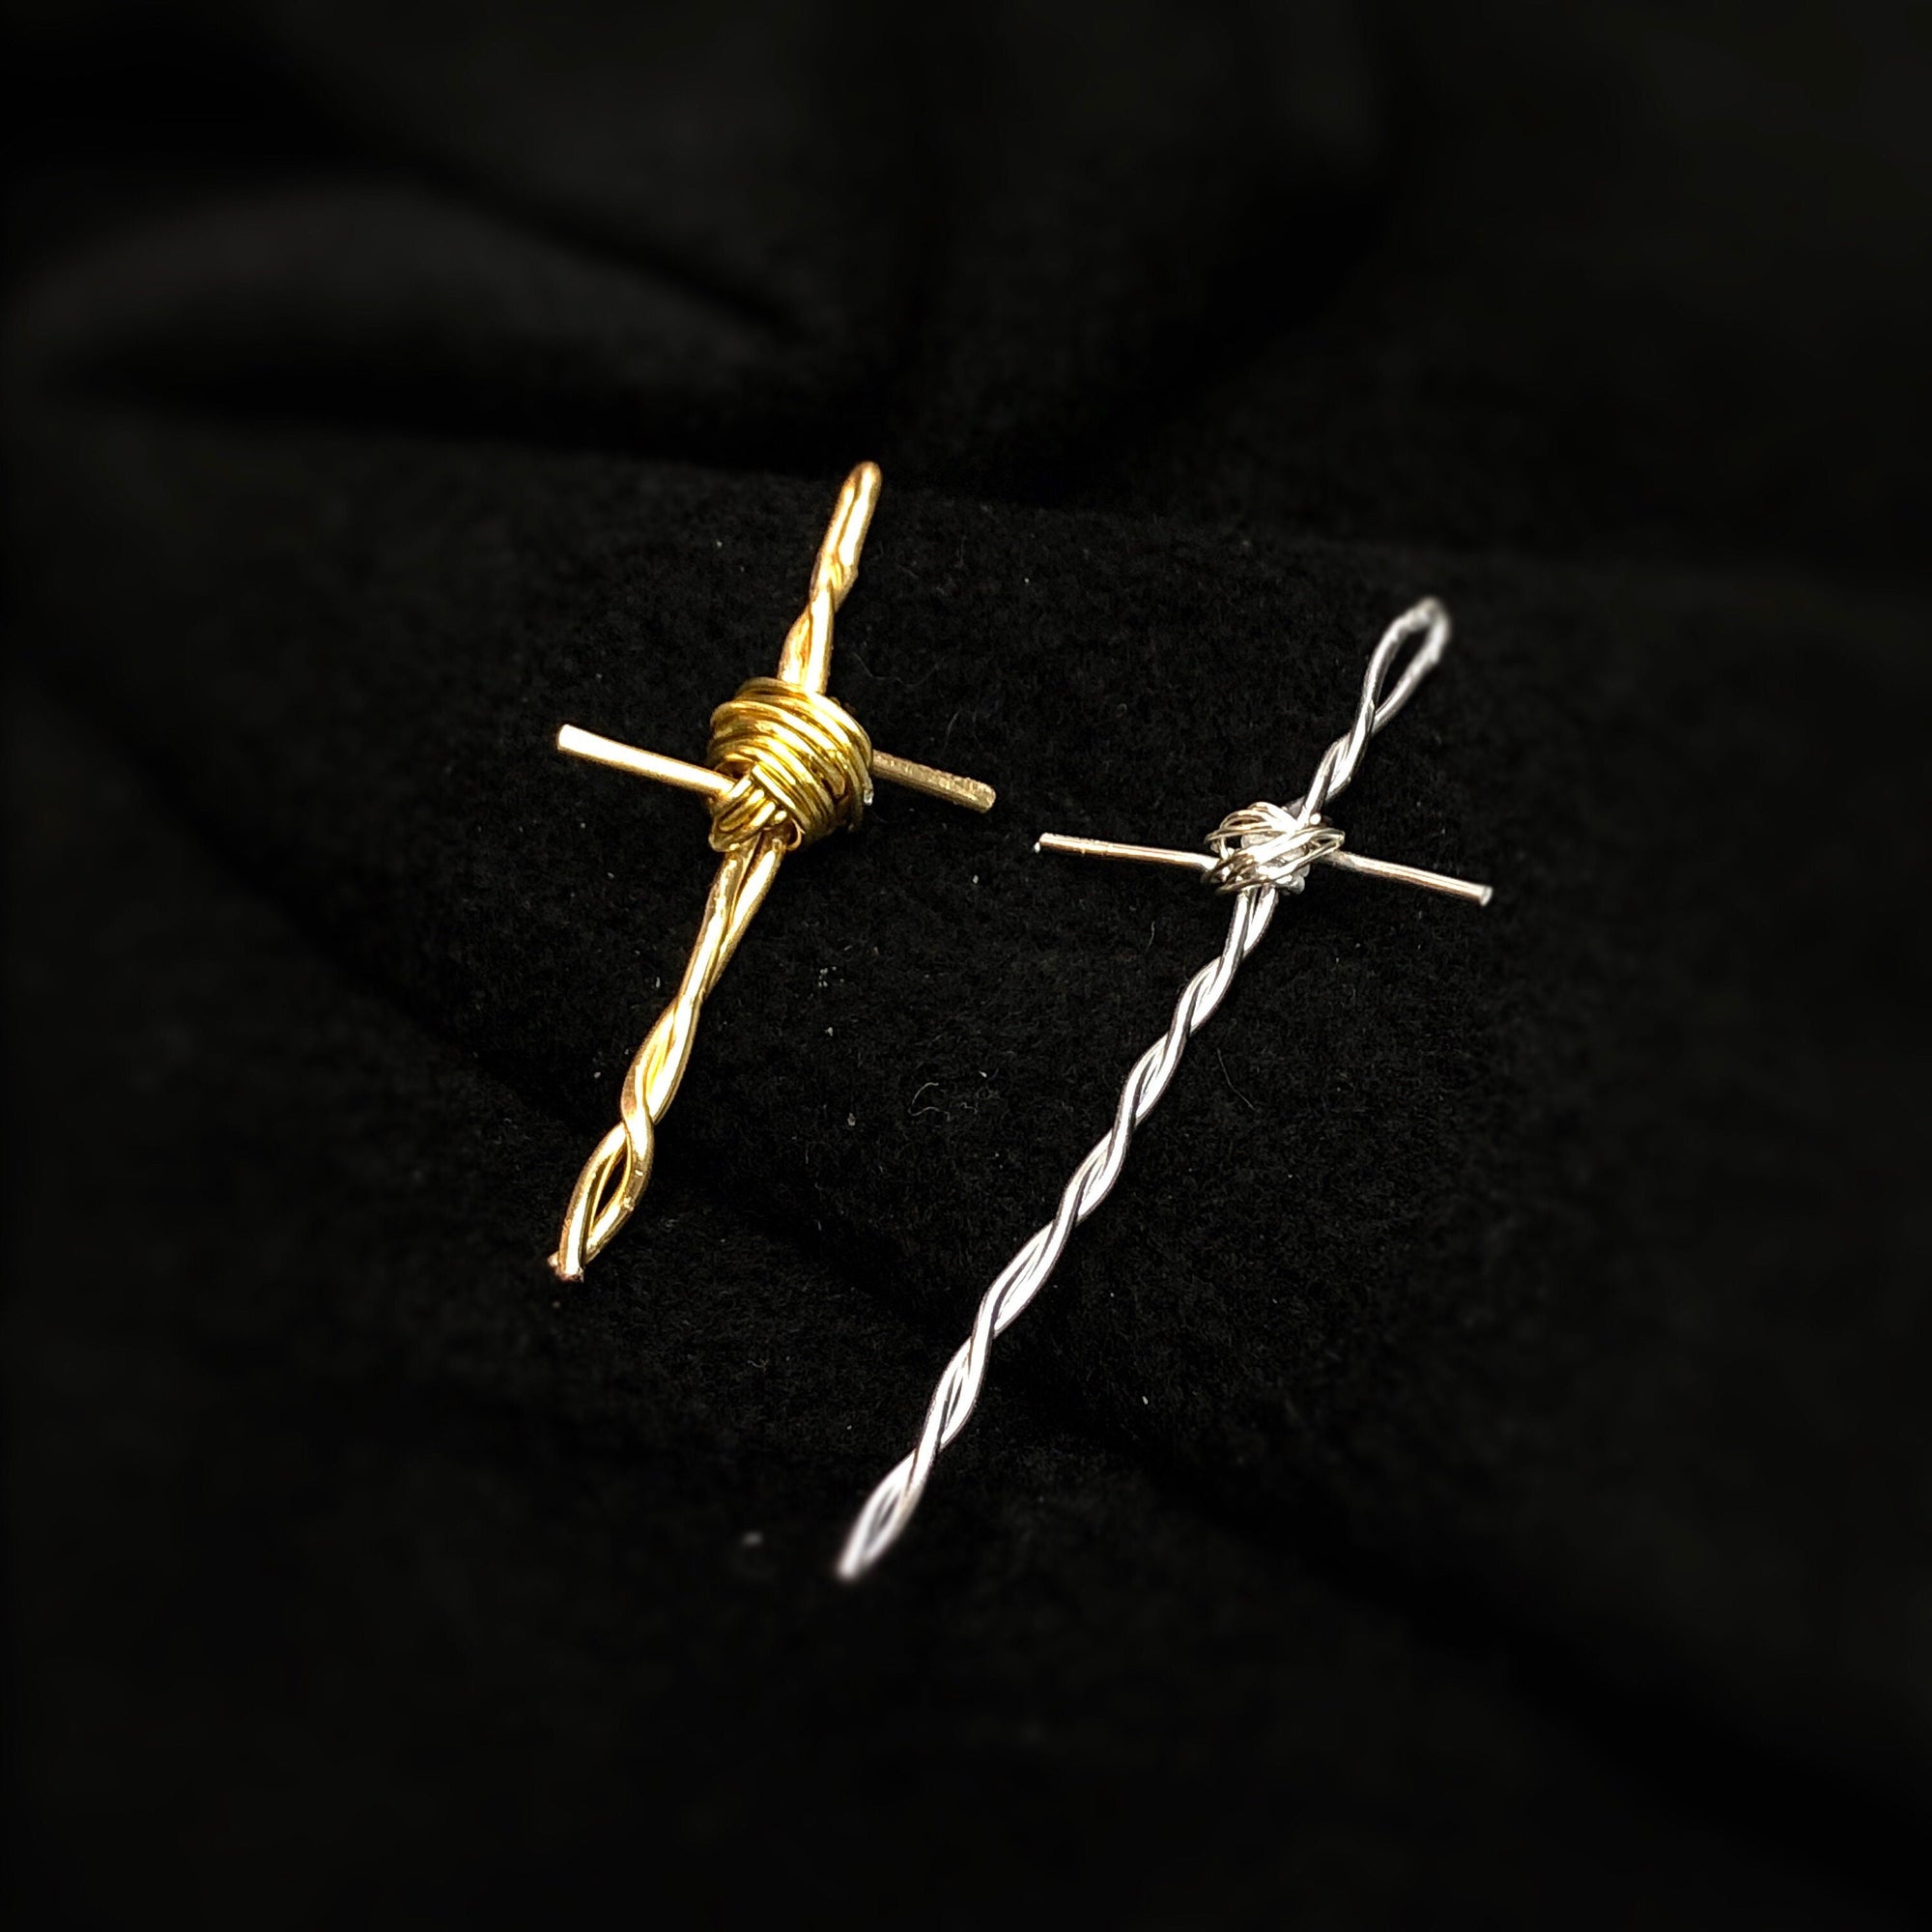 Faithful and Rustic: Cross Pendant Necklace in Gold, Silver, Rose Gold, or Black